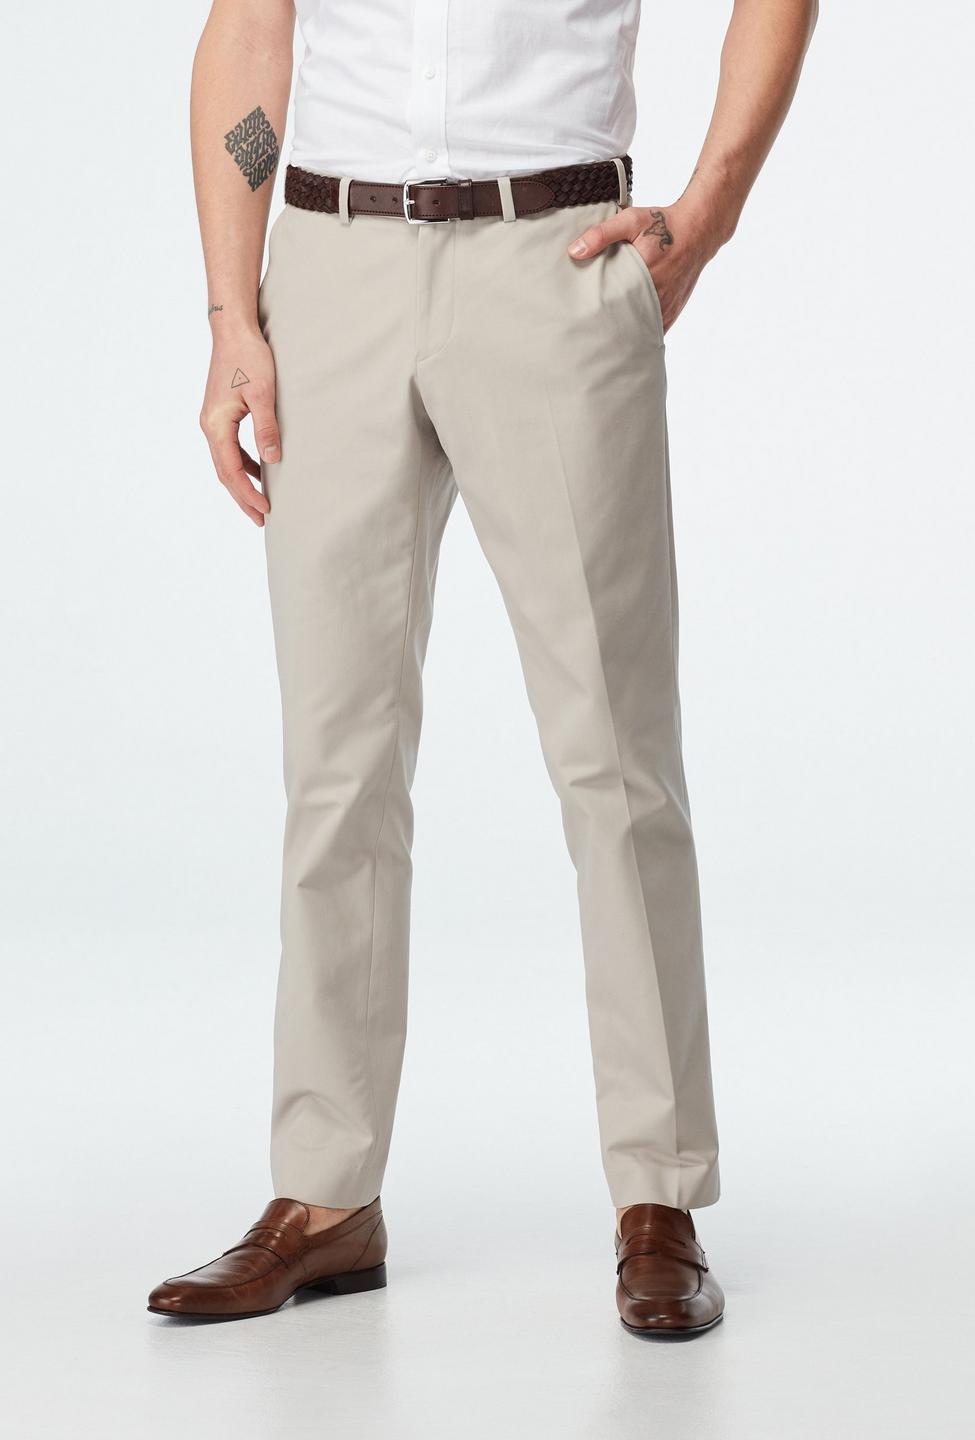 Gray pants - Houndslow Solid Design from Premium Indochino Collection